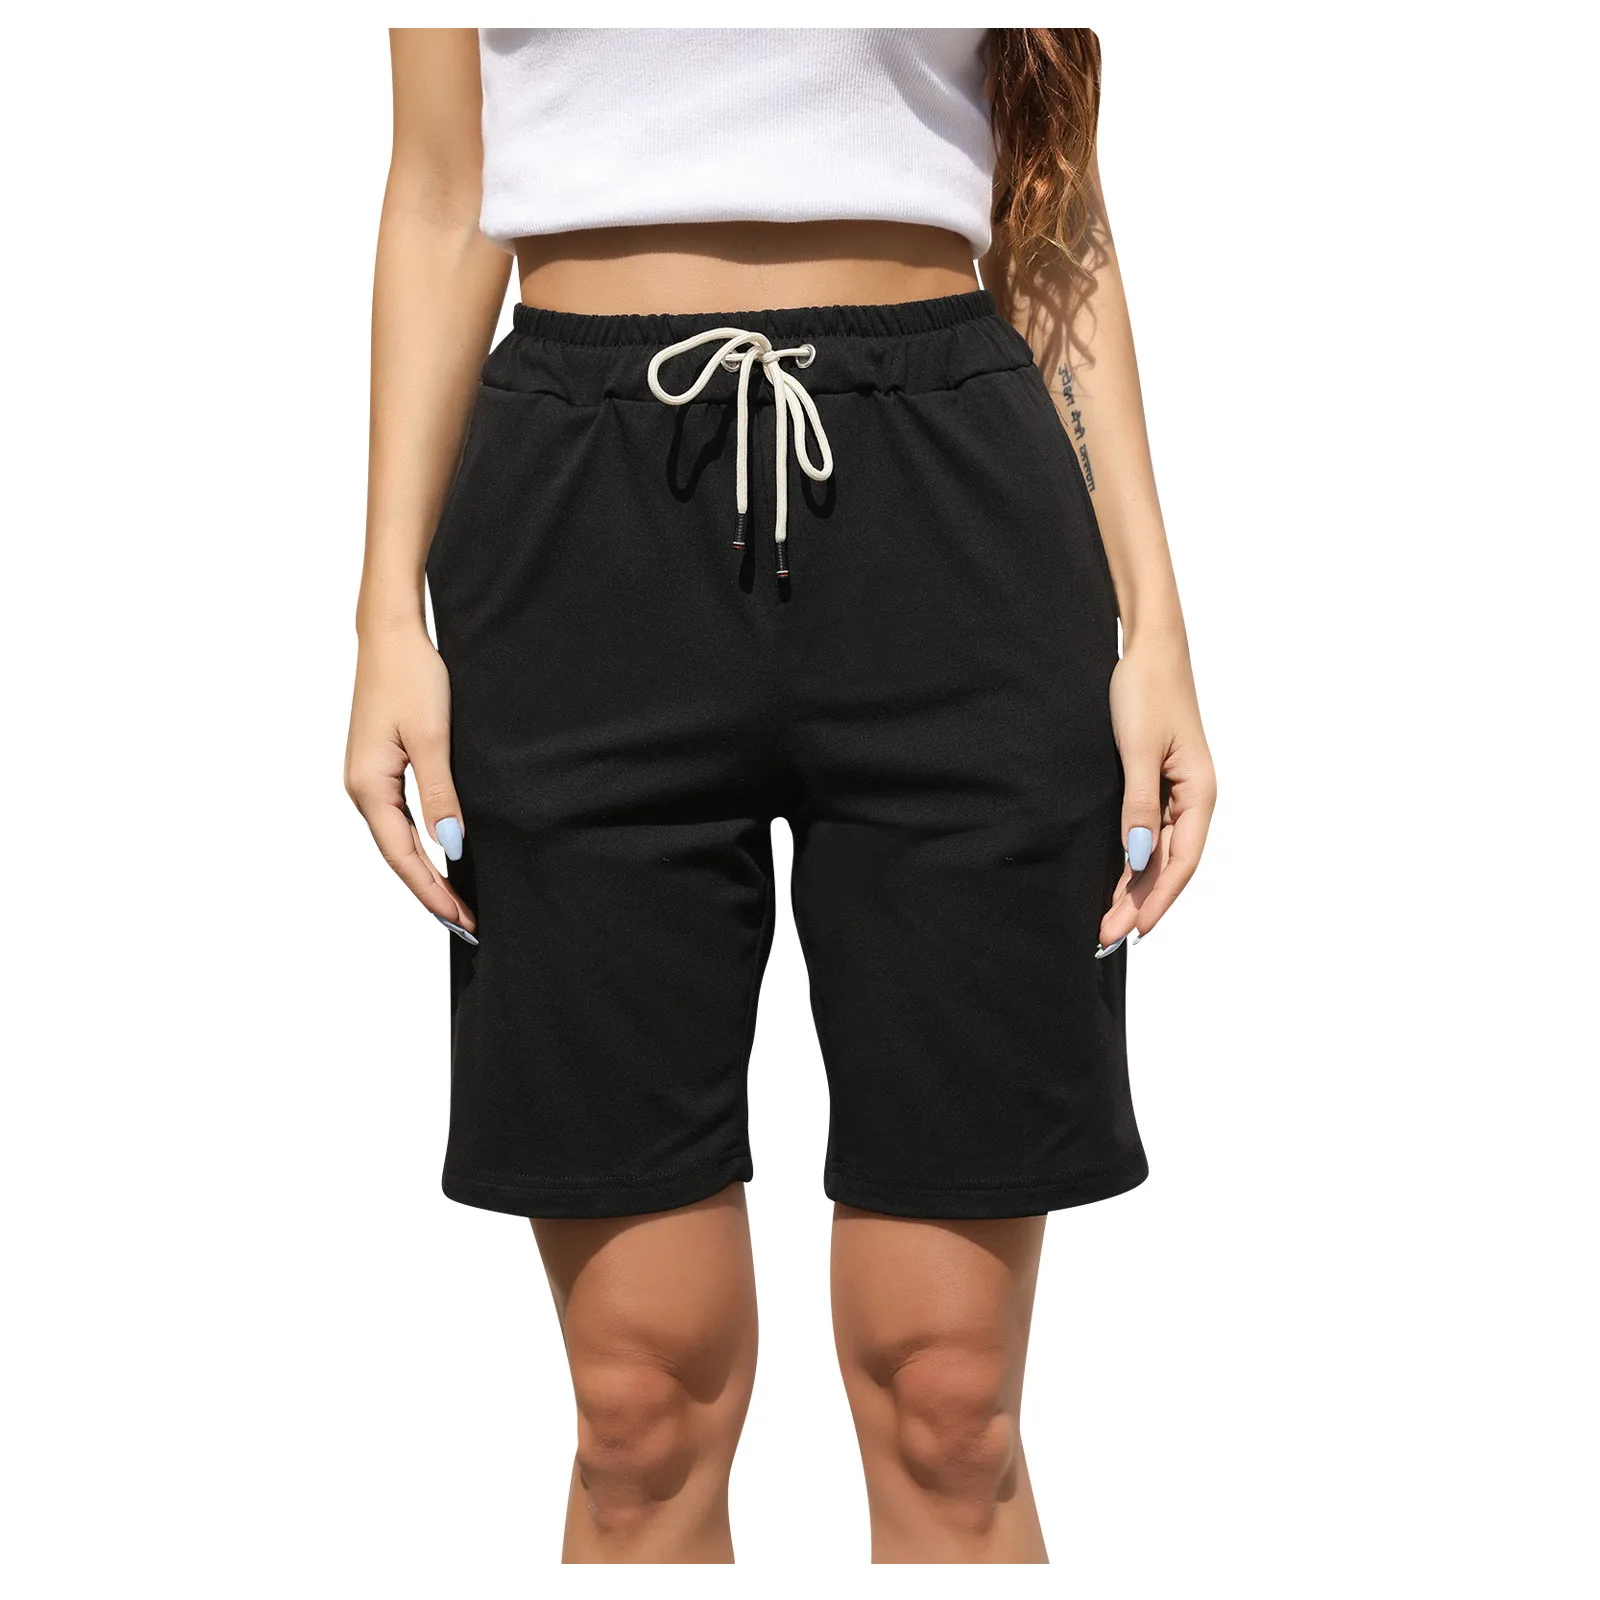 spandex shorts 2021 Summer Casual Straight Shorts Women's Summer Motion Elastic Waist Solid Color Frenulum Casual Straight Shorts Sports Pants basketball shorts